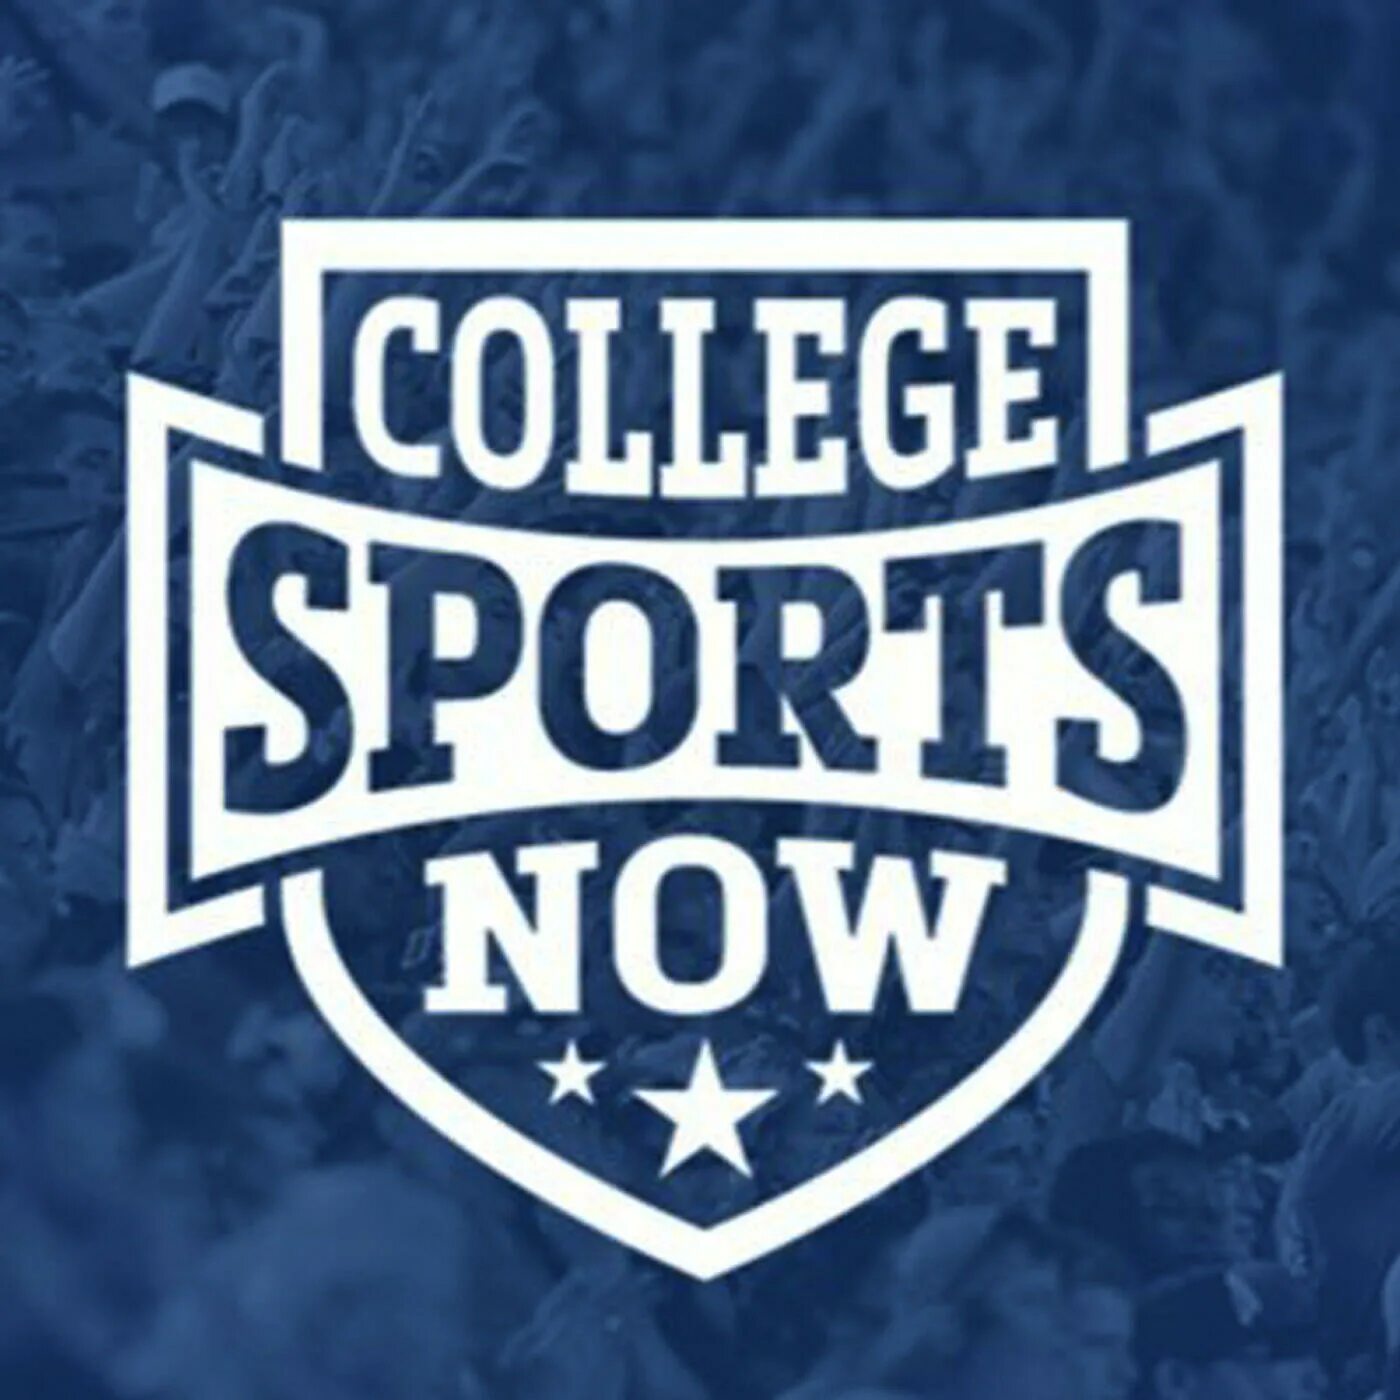 Now sports 1. College Sport. Sports College. Diffecr Sports collage. College Sport Club.